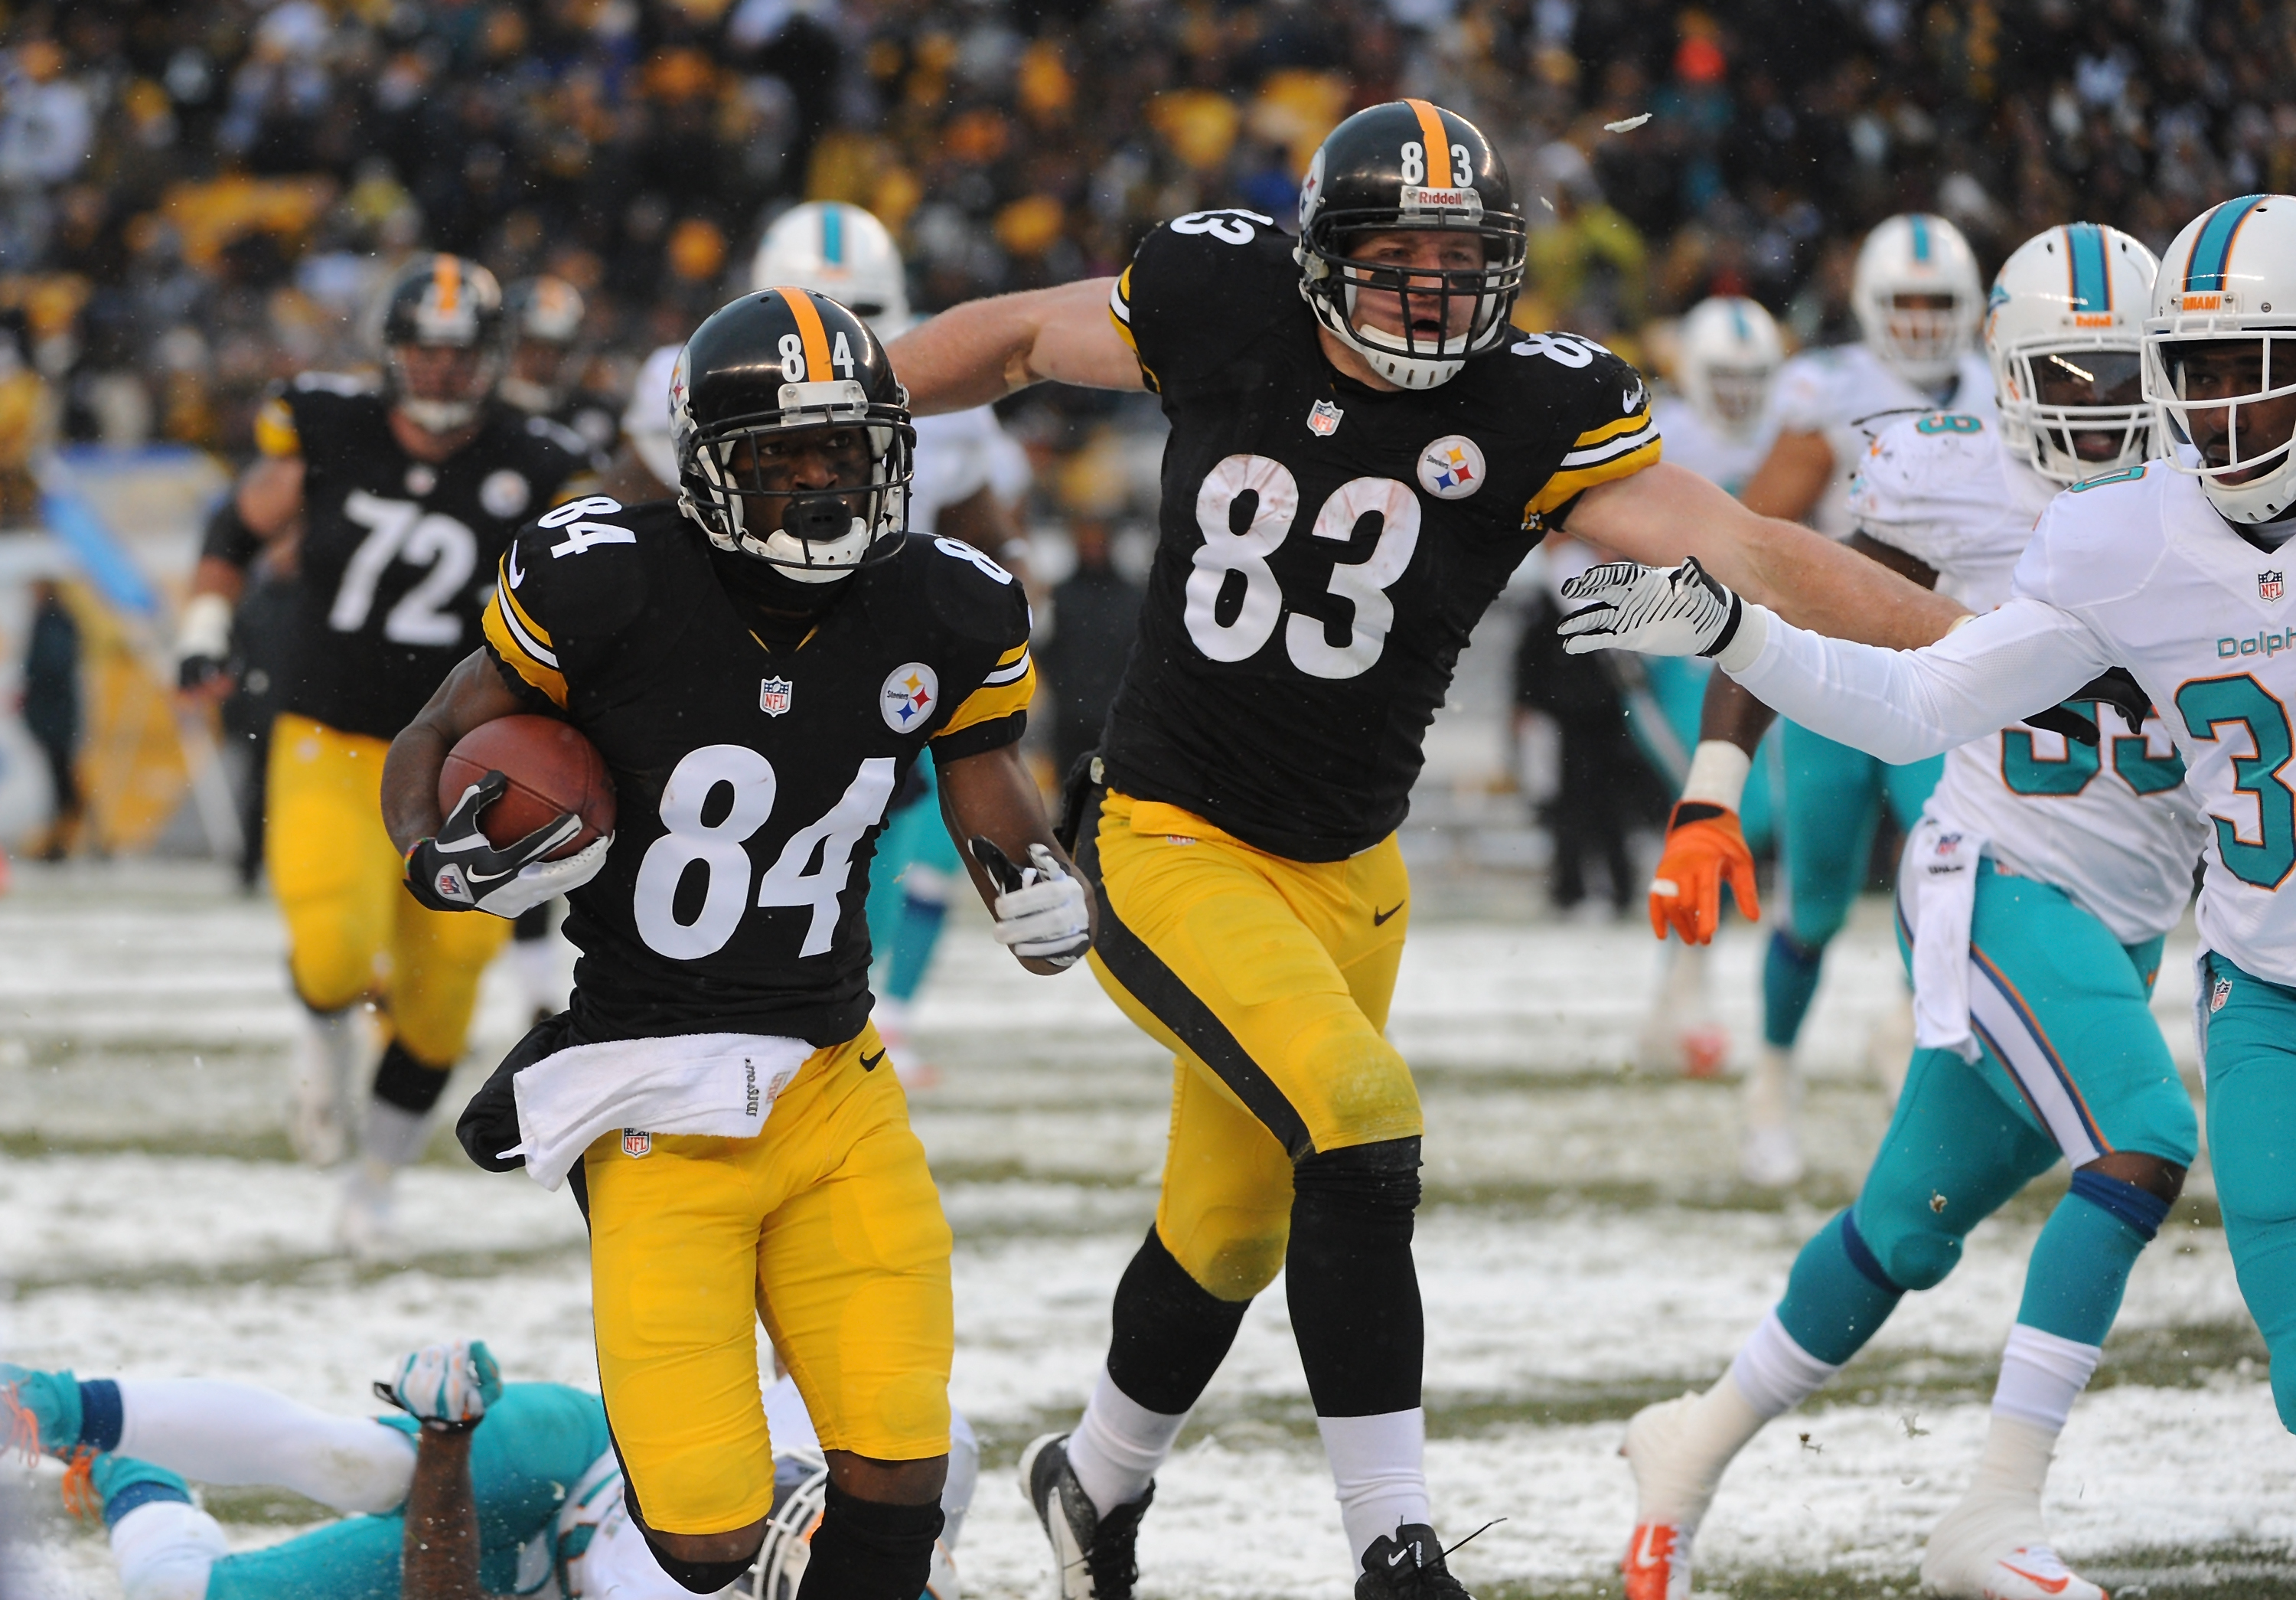 Steelers at Dolphins Highlights, score, and recap